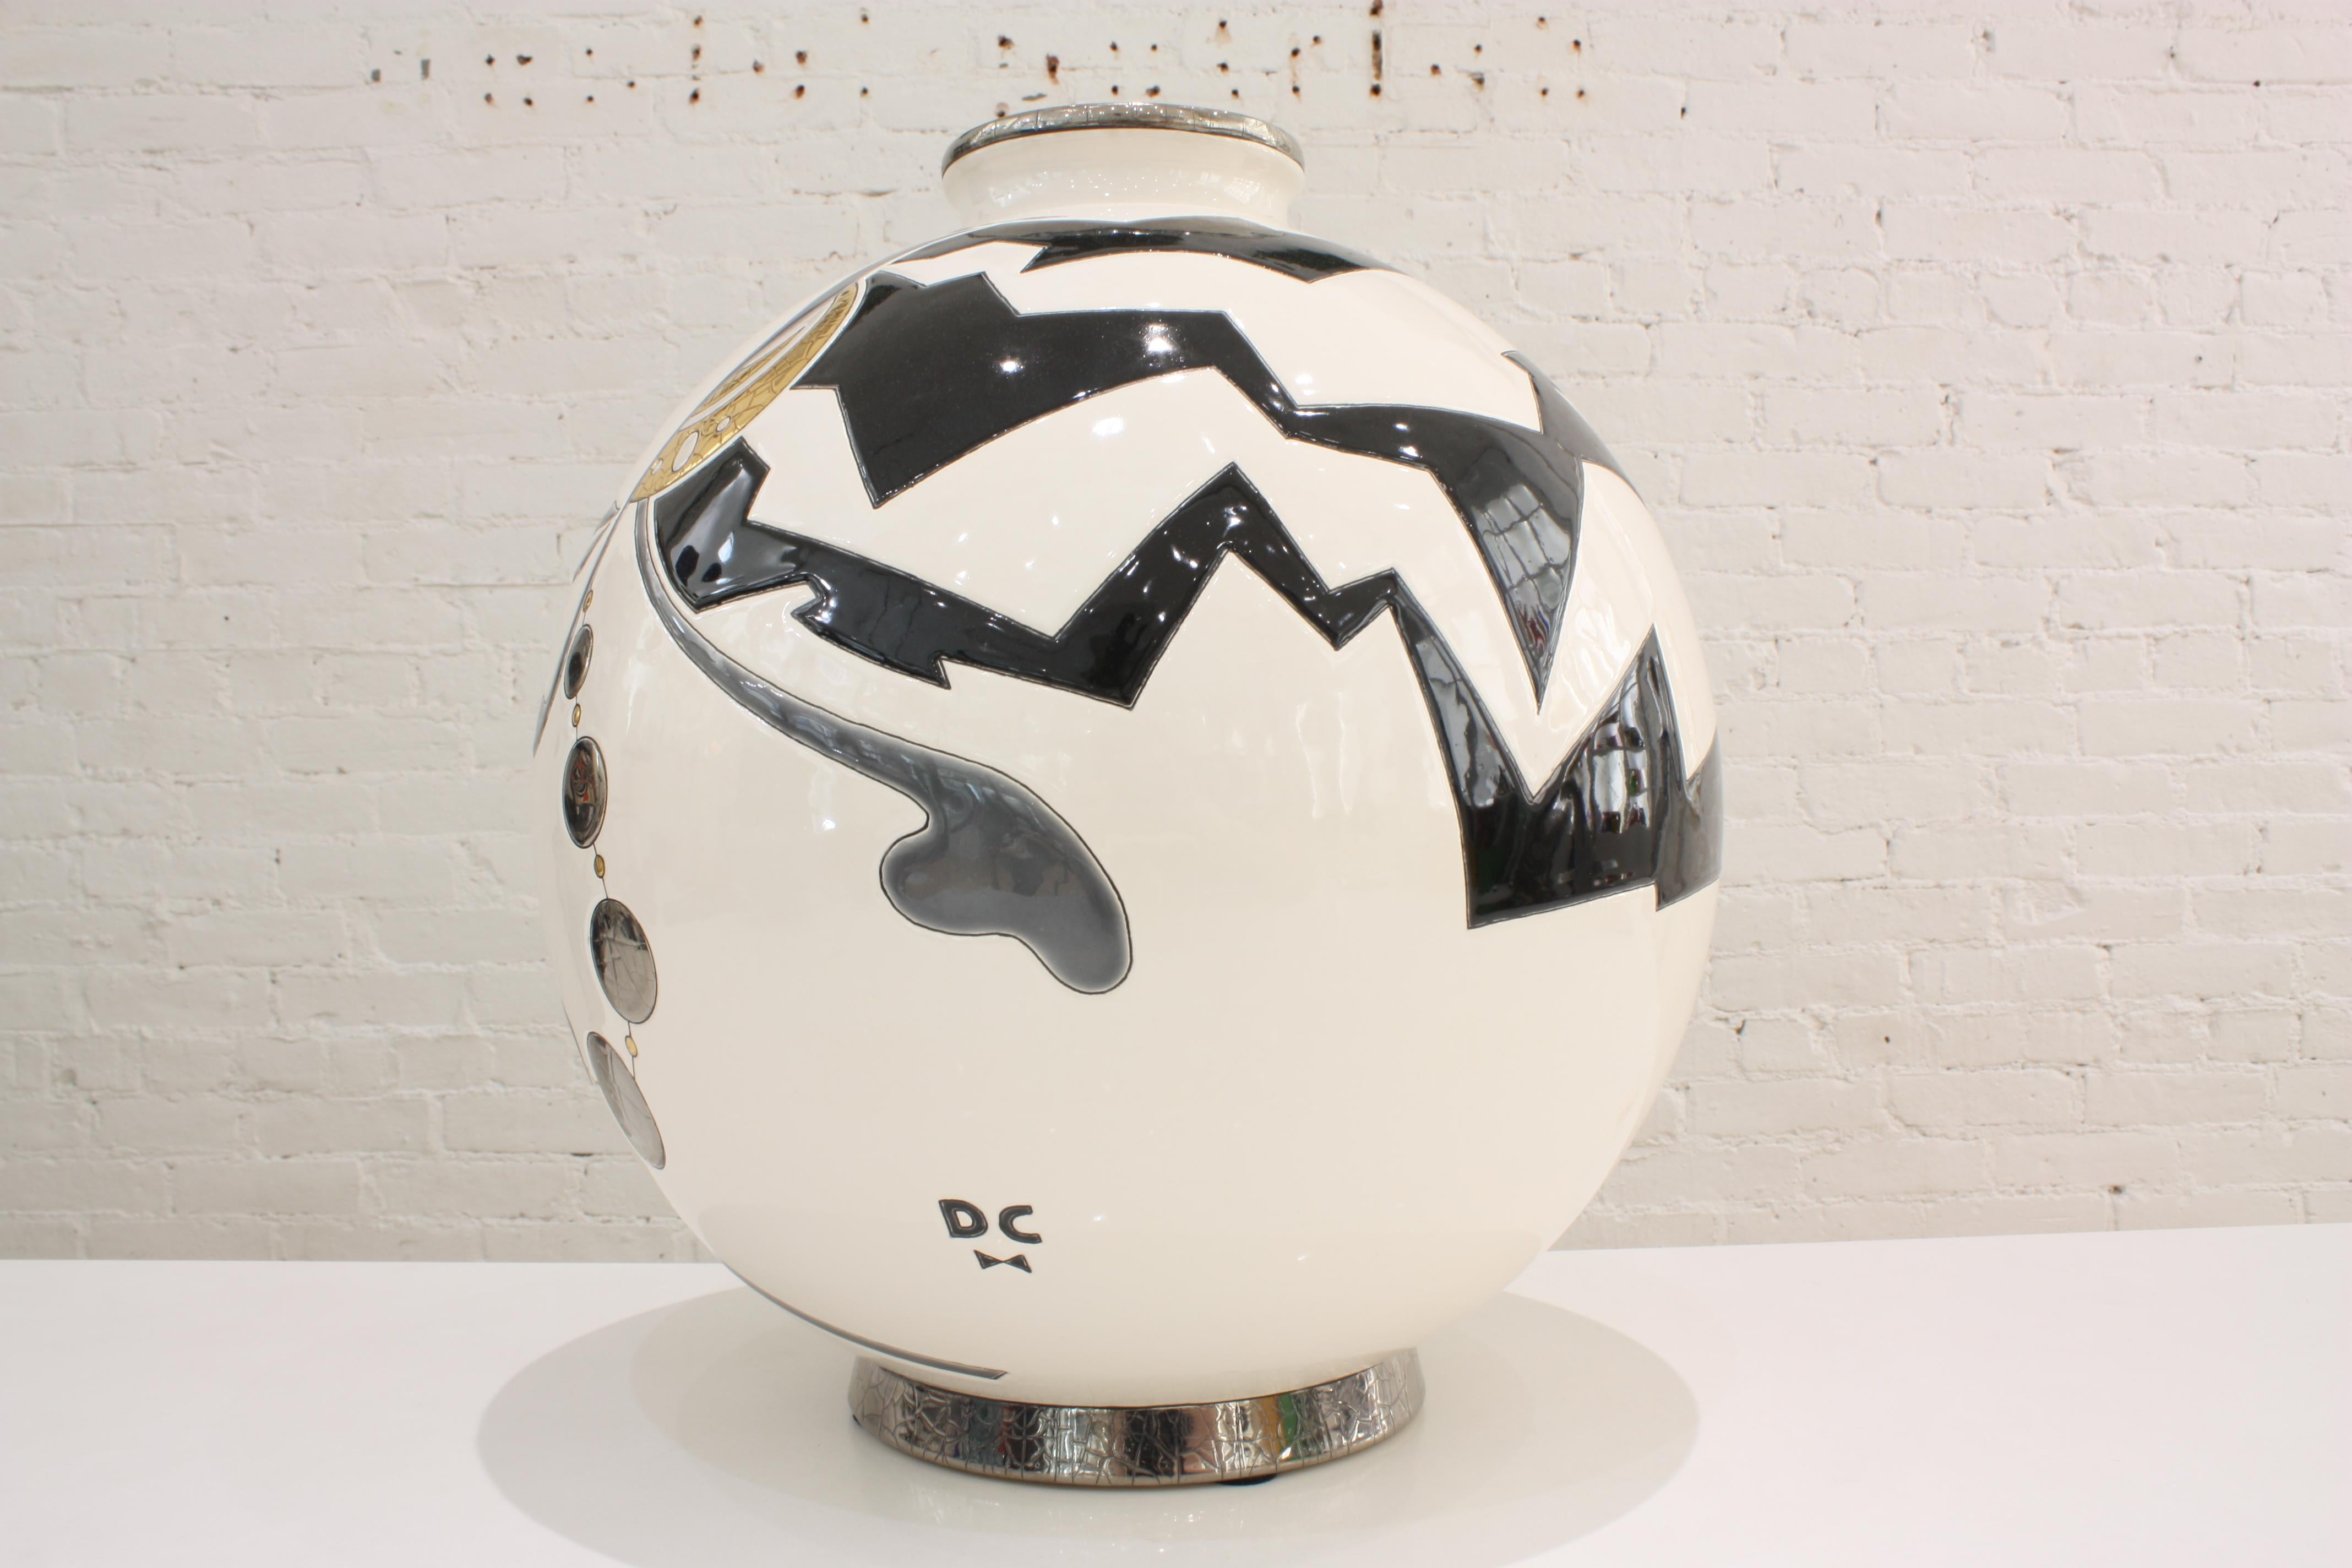 Superb round vase in limited edition in Art Deco style. The artist Danillo Curetti was commissioned by Les Emaux de Longwy to create this design for their world famous Boule vases. 

Black and white, gold 21.7 carat, platinum 18.7 carat

Limited